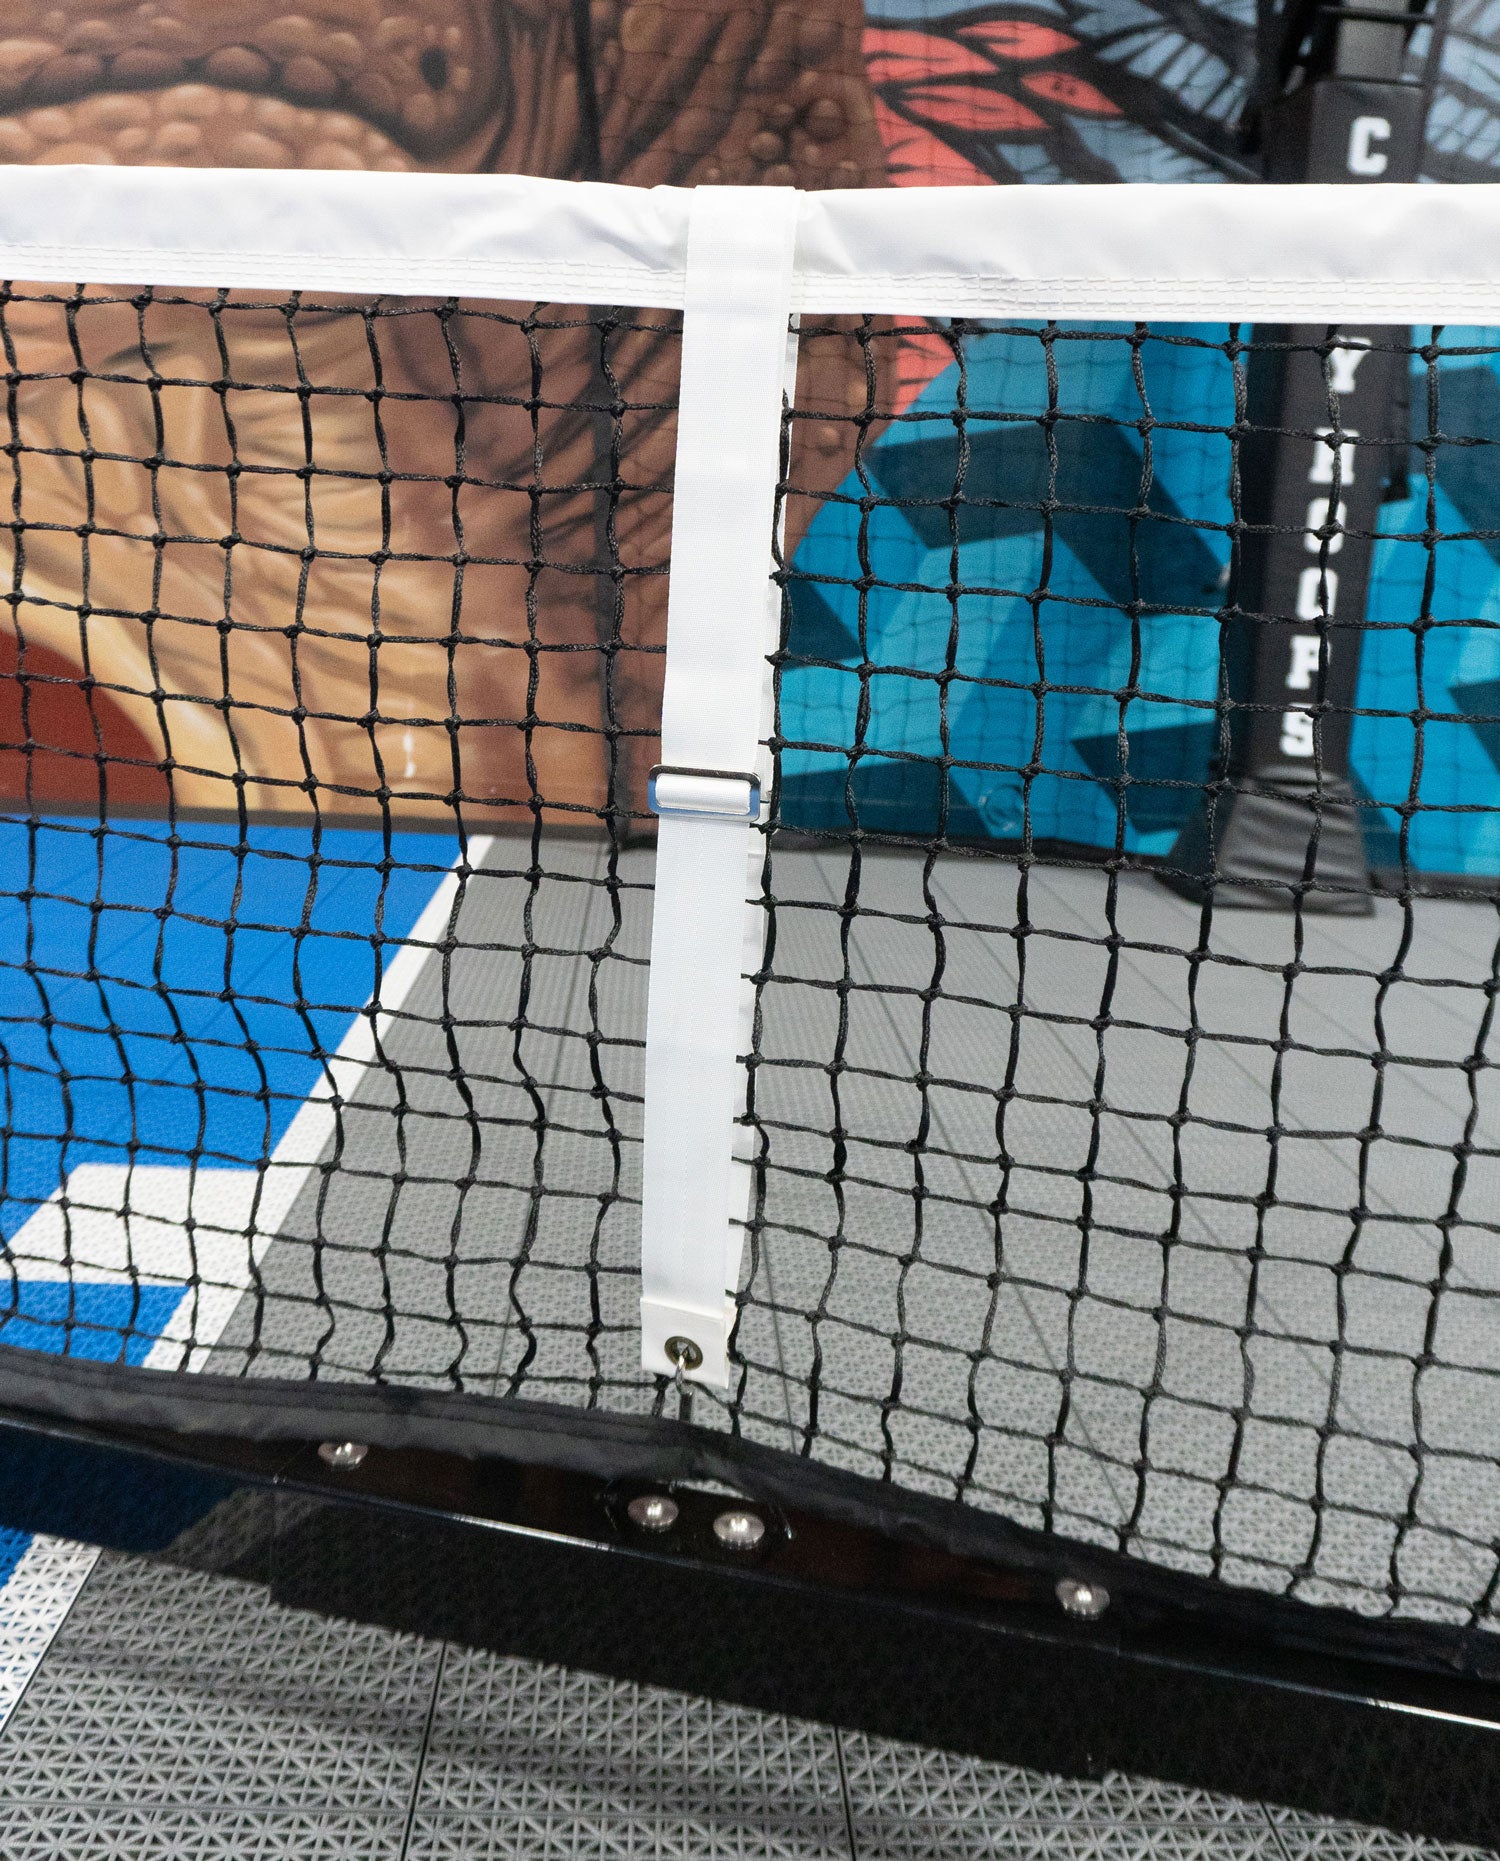 EIGHTYNINE Sports - Professional Portable Pickleball Net System - DIY Court Canada